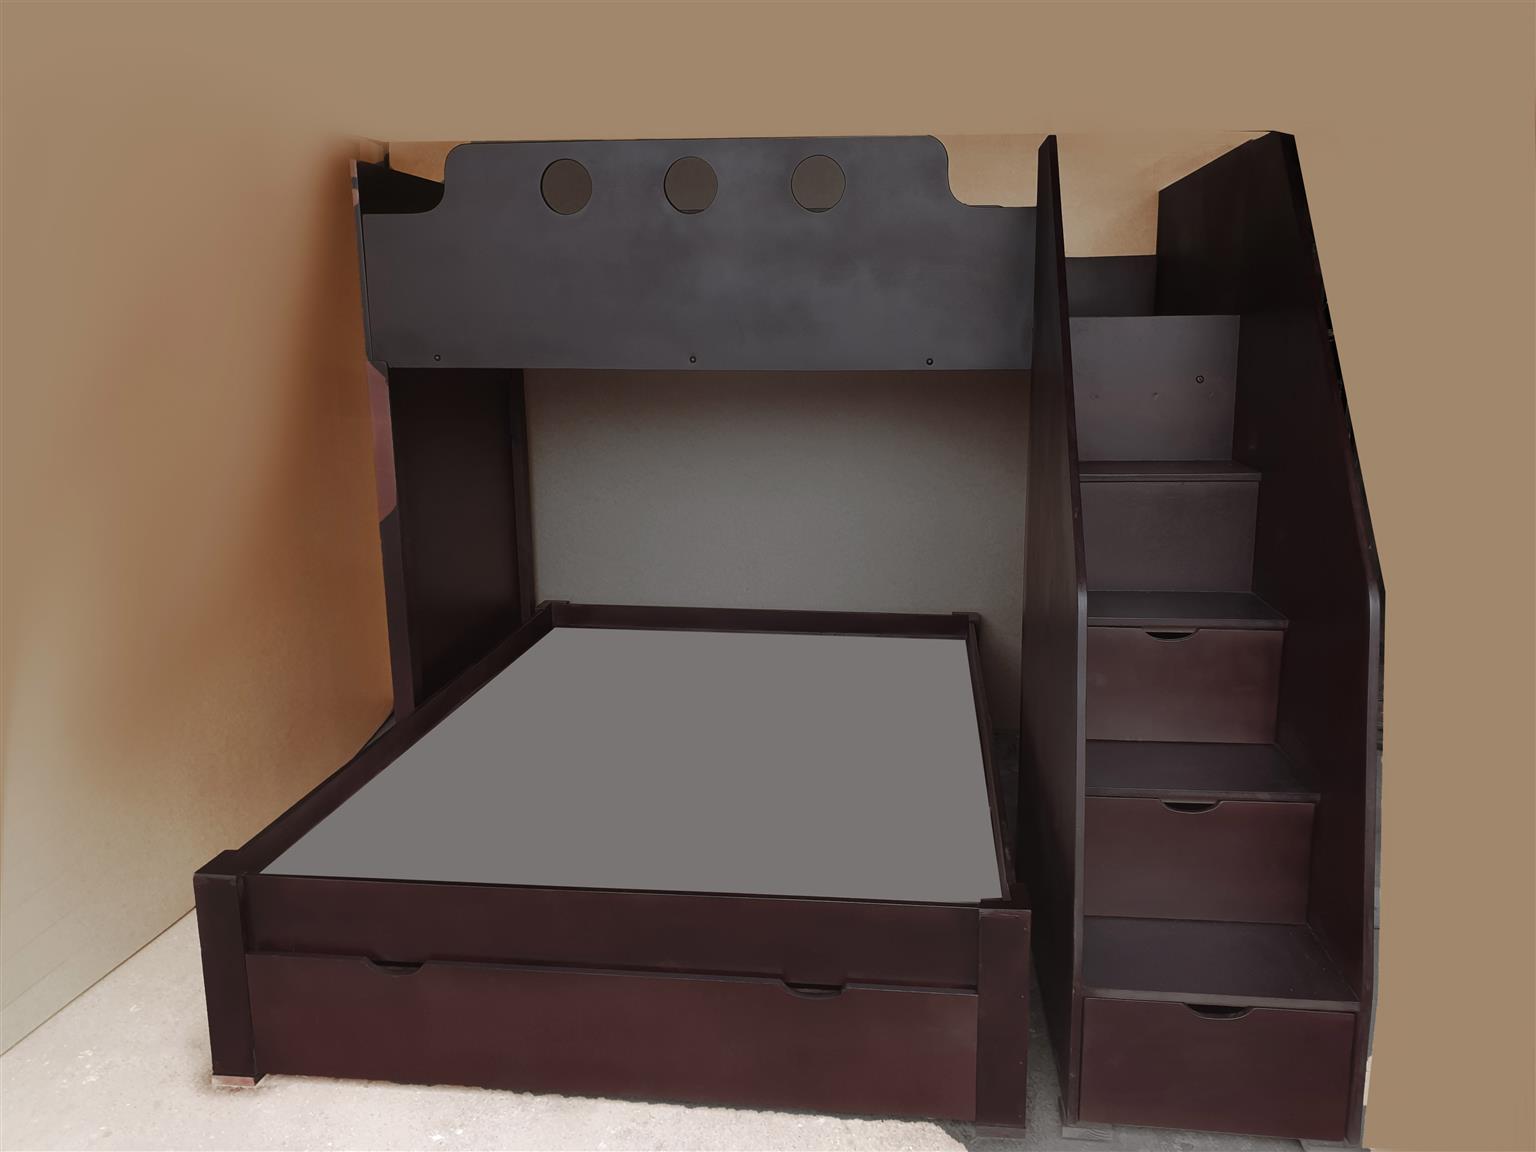 Fitted Bunk Bed KA 02-R6999 